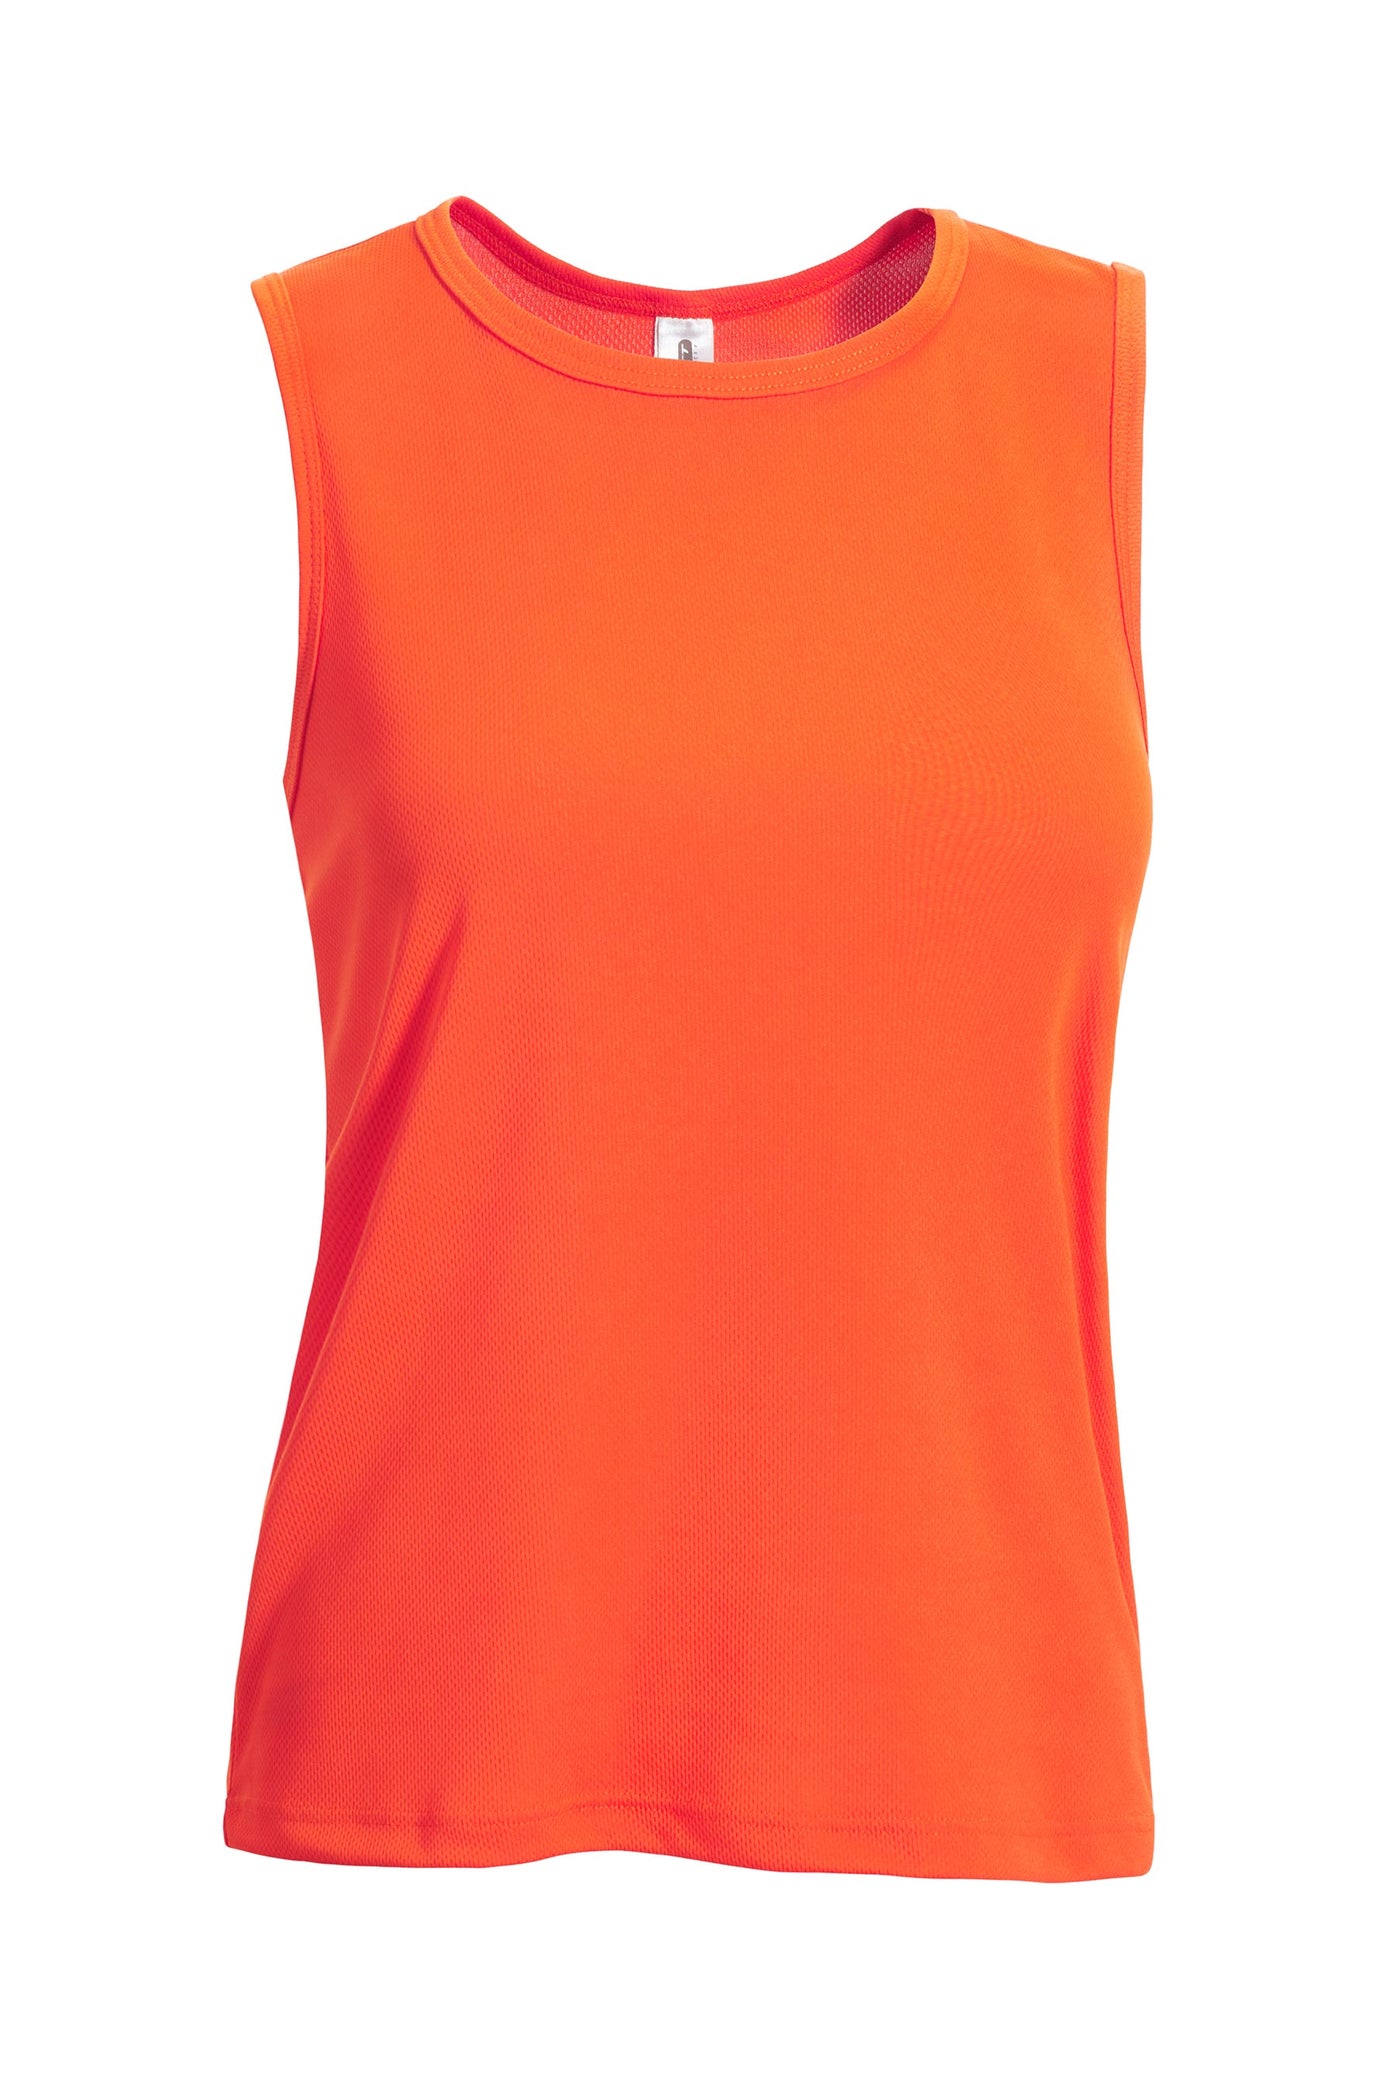 Oxymesh™ Muscle Tank 🇺🇸 - Expert Brand Apparel#color_orange